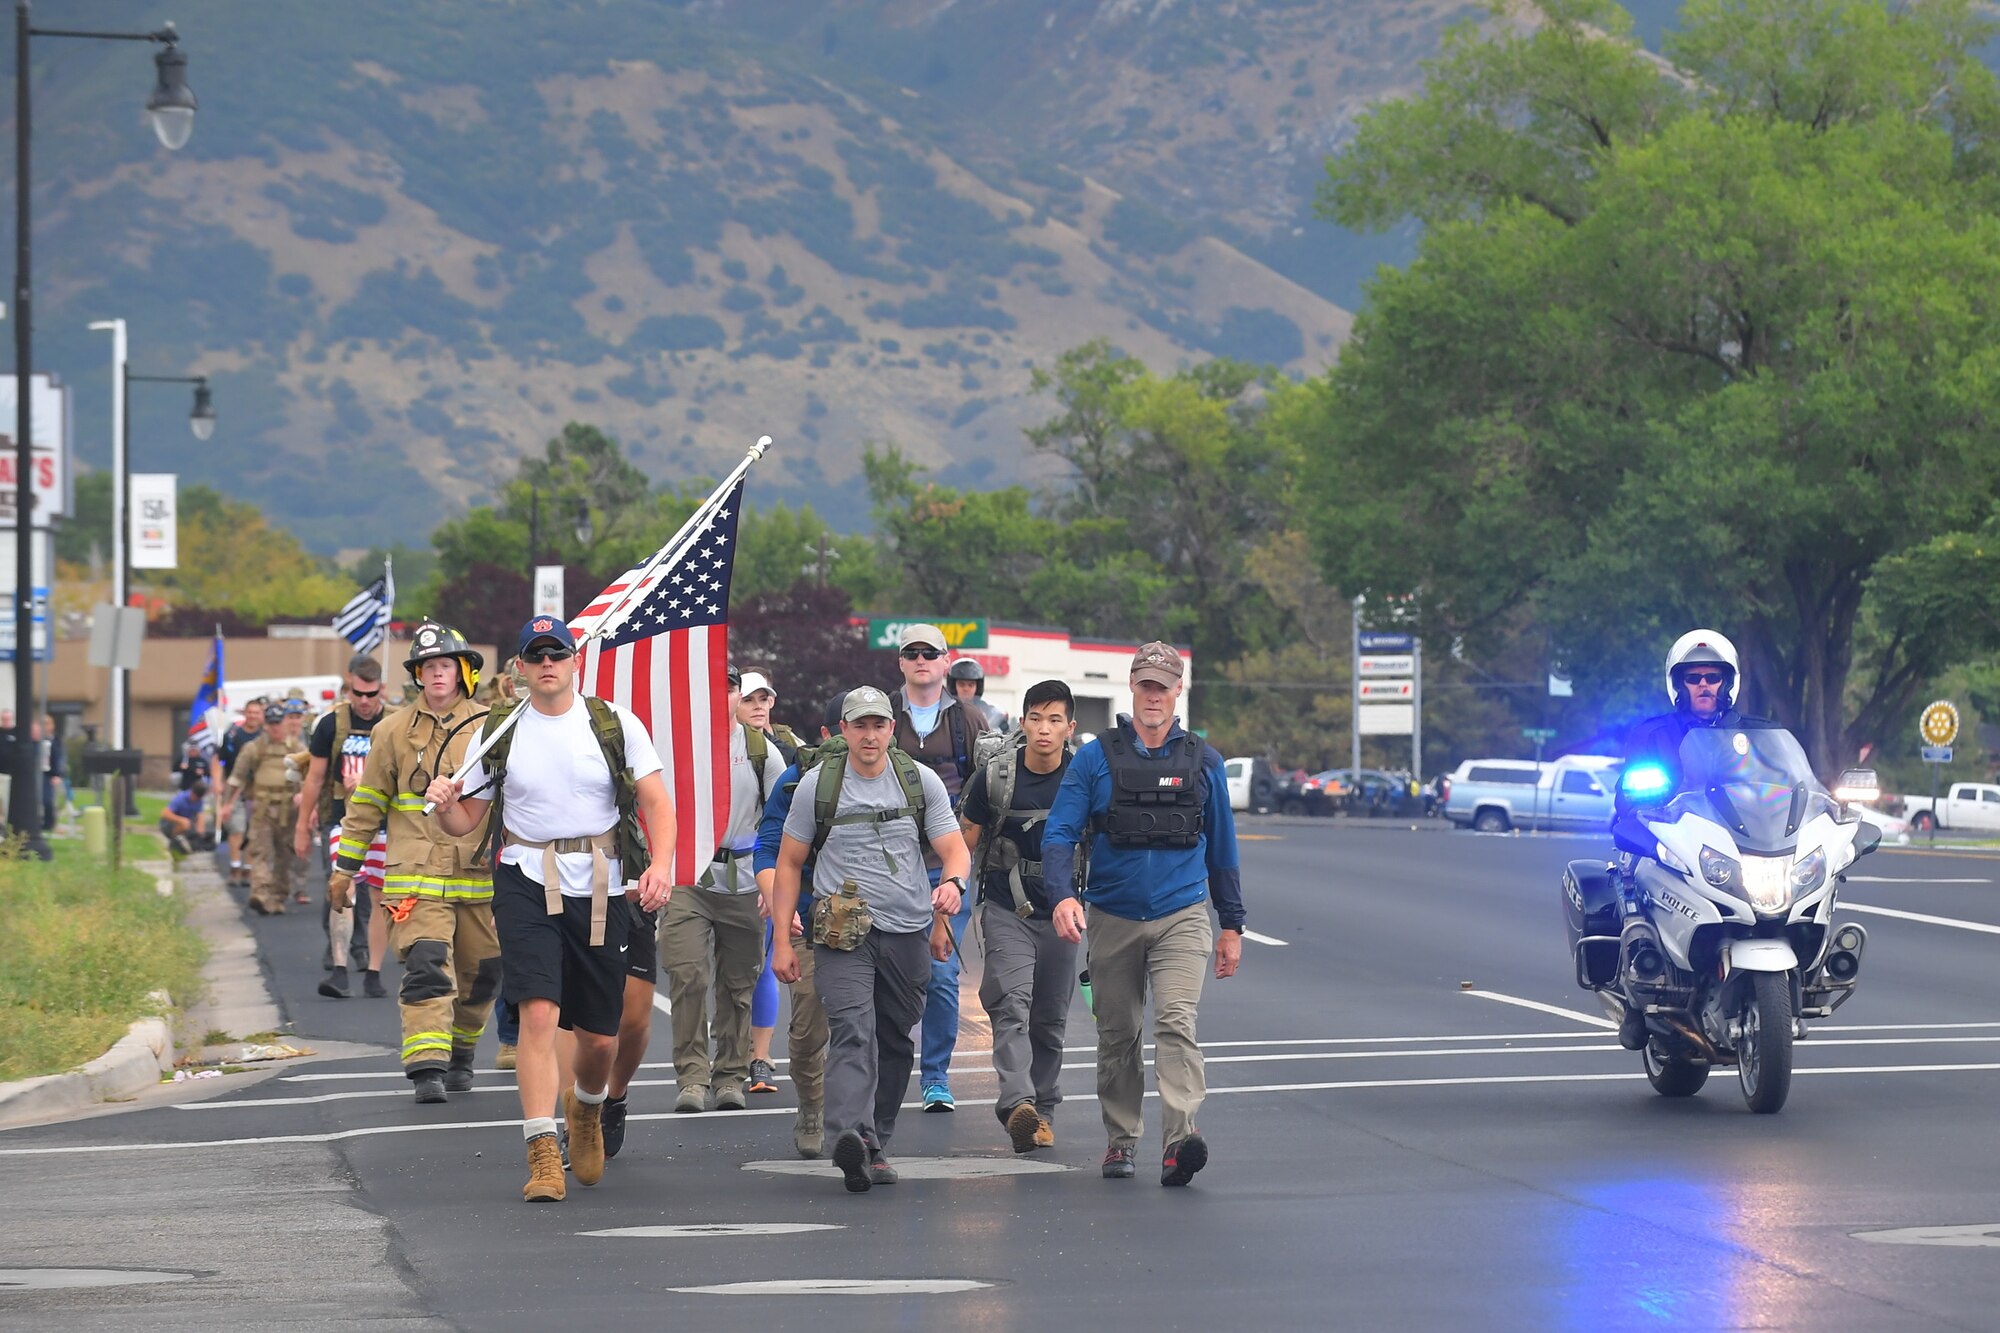 Participants walked 9.11 miles, some with 30-pound packs or firefighter gear during 9/11 Memorial Ruck March, in Kaysville, Utah, Sept. 11, 2019. The event was co-sponsored by Hill Air Force Base first responders and fire and police departments from Kaysville and Layton, to honor and remember the fallen from the events of Sept. 11, 2001. (U.S. Air Force photo by Todd Cromar)